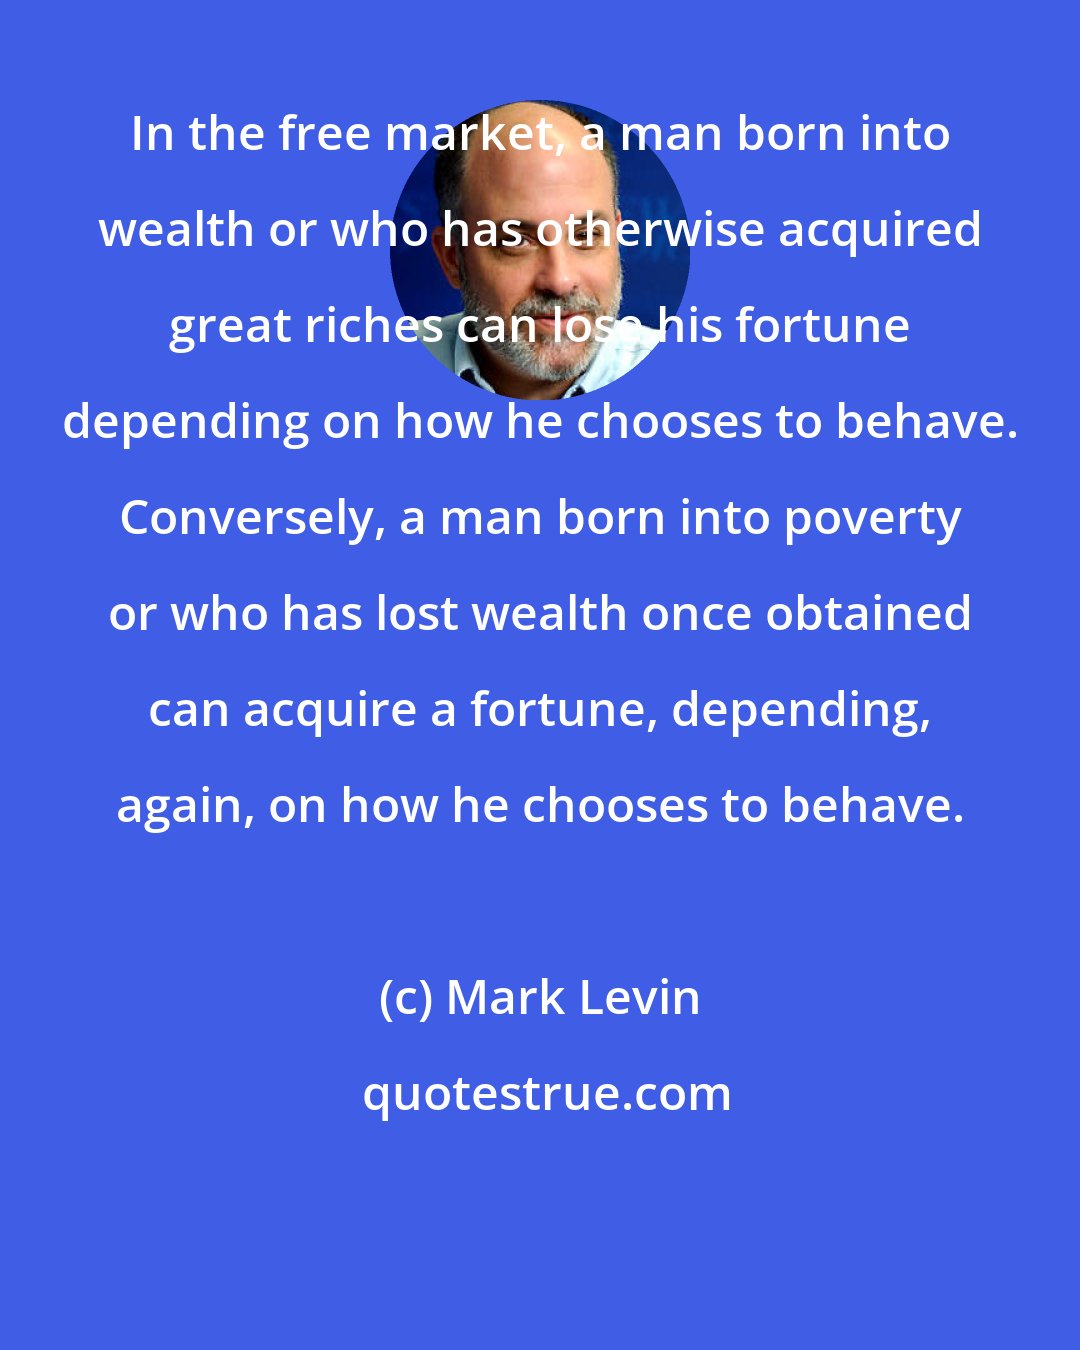 Mark Levin: In the free market, a man born into wealth or who has otherwise acquired great riches can lose his fortune depending on how he chooses to behave. Conversely, a man born into poverty or who has lost wealth once obtained can acquire a fortune, depending, again, on how he chooses to behave.